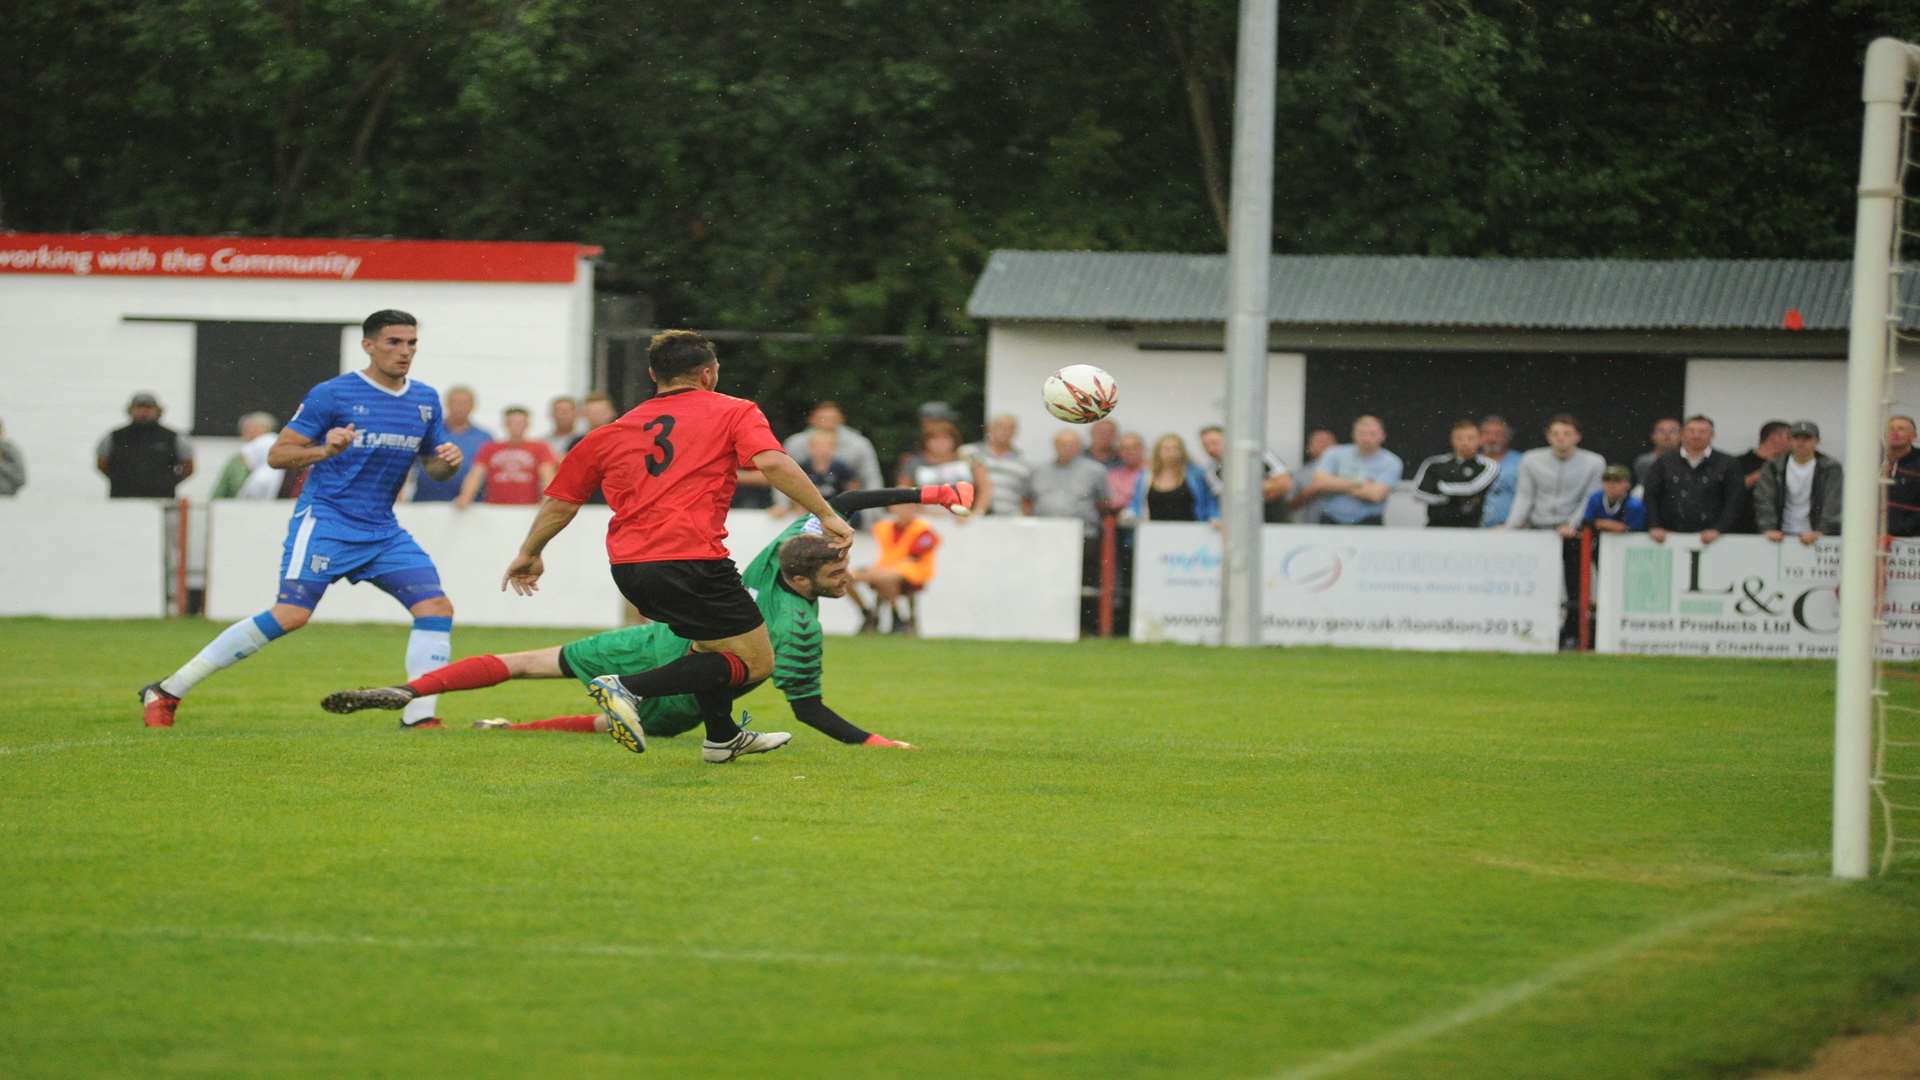 Conor Wilkinson chips the keeper to make it 3-0 Picture: Steve Crispe